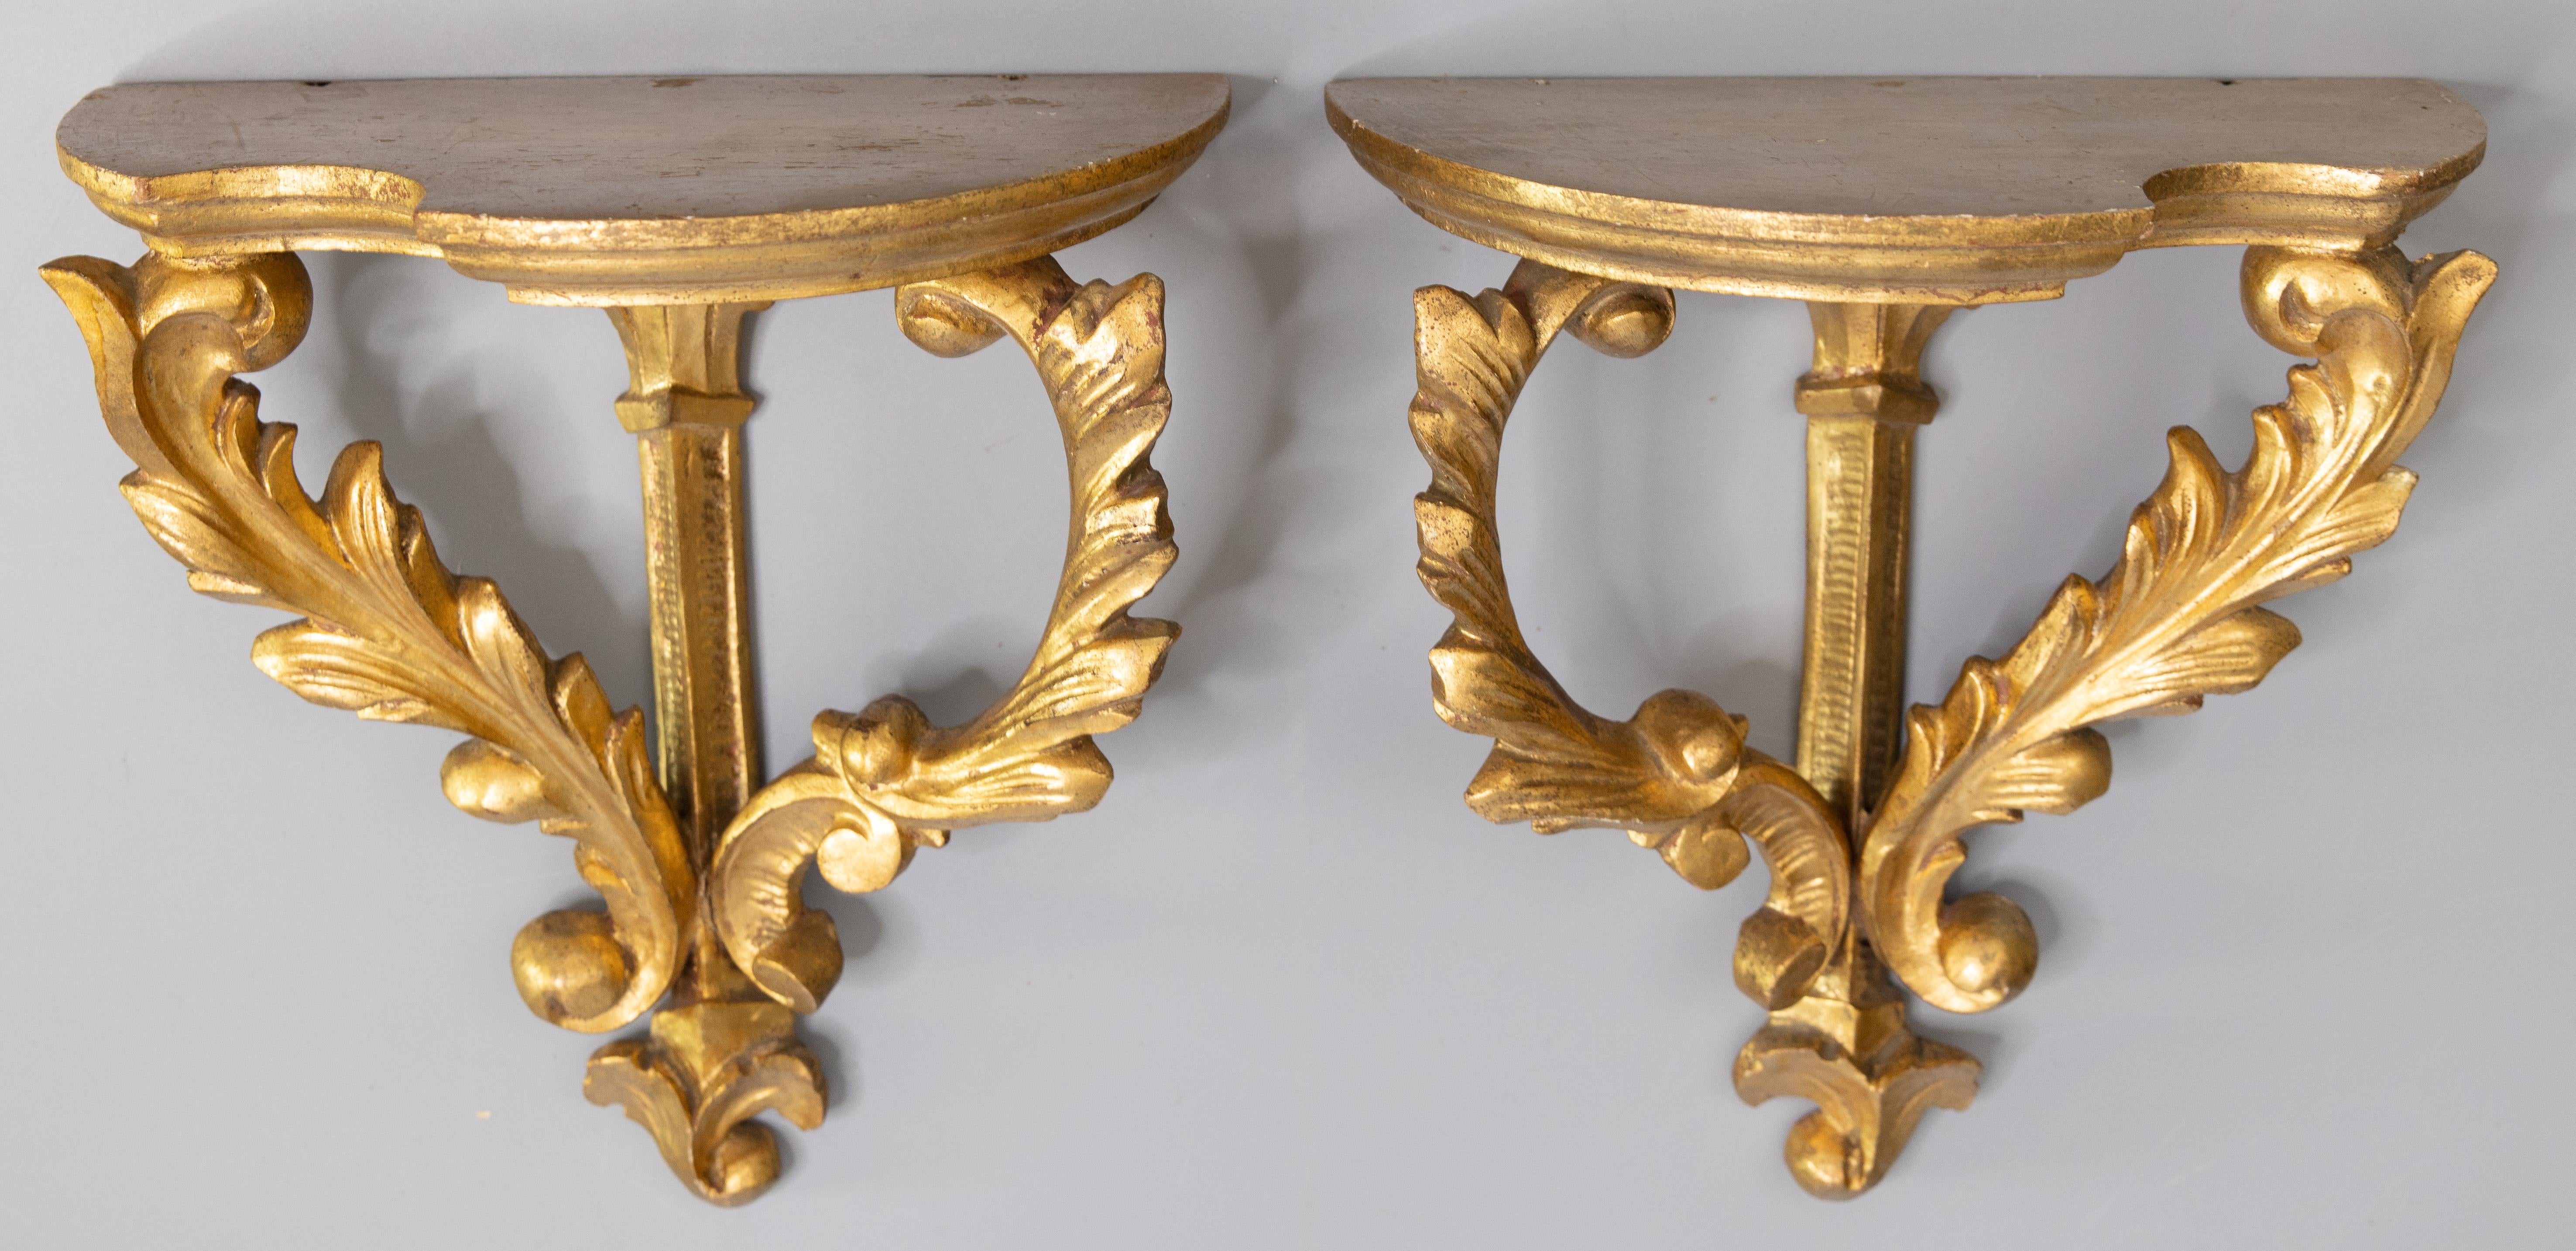 A lovely pair of Italian Neoclassical style gilded wood wall brackets shelves, circa 1950. Marked 